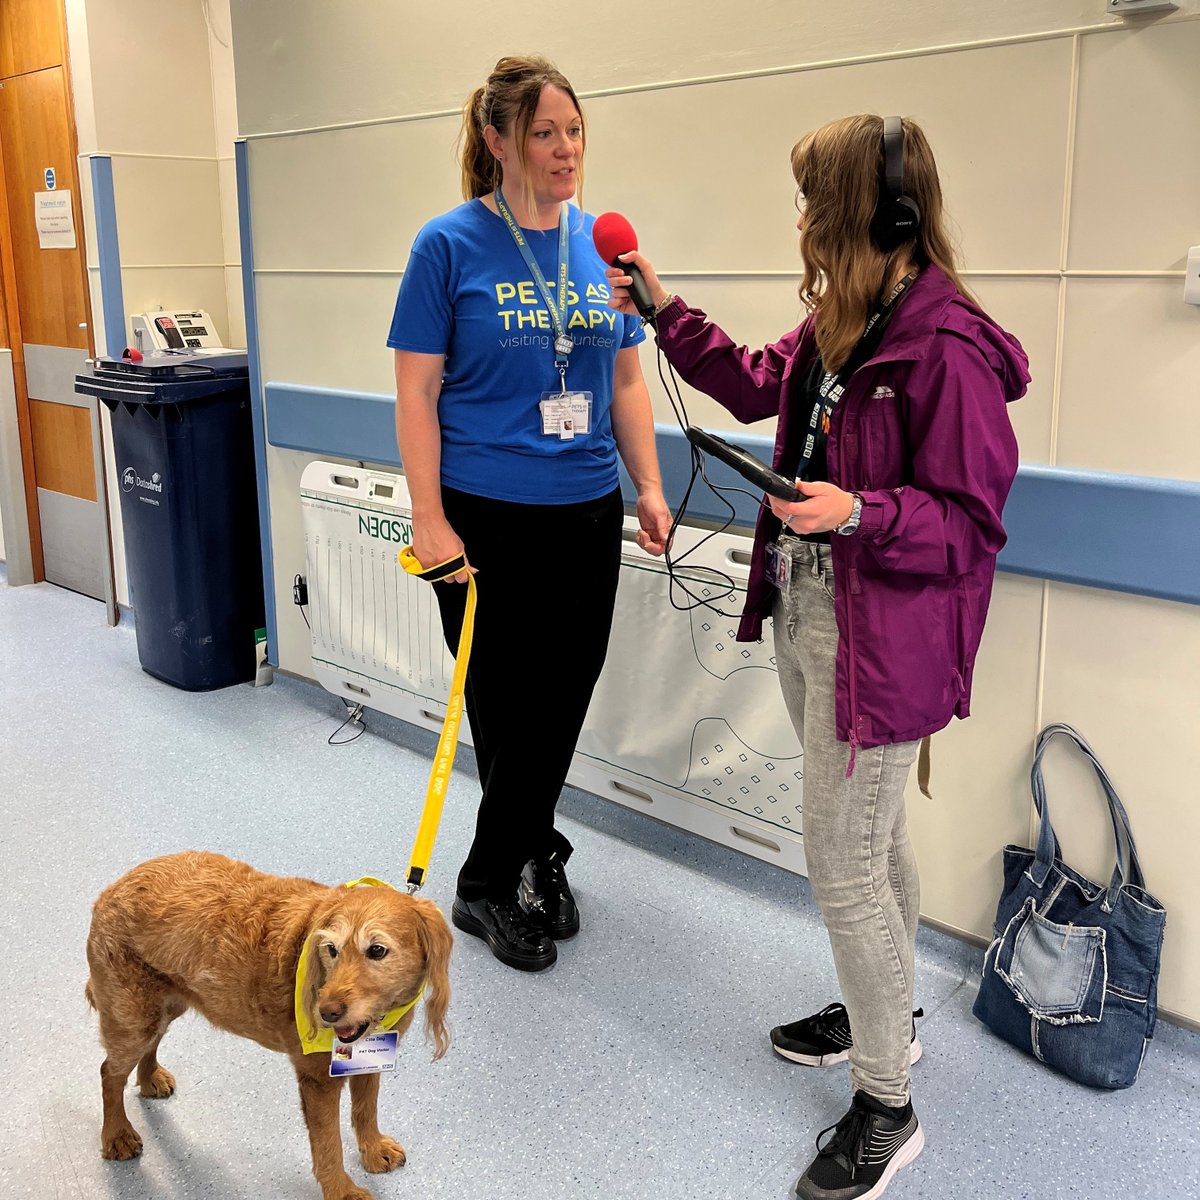 🐾Earlier this week, @BBCLeicester's Ady Dayman Breakfast Show accompanied Ruth Johnson and her PAT dog, Cilla, for their fortnightly visit to the Adult Intensive Care Unit at the Leicester Royal Infirmary. Hear what they got up to (from 1:41): bbc.co.uk/programmes/p0g…